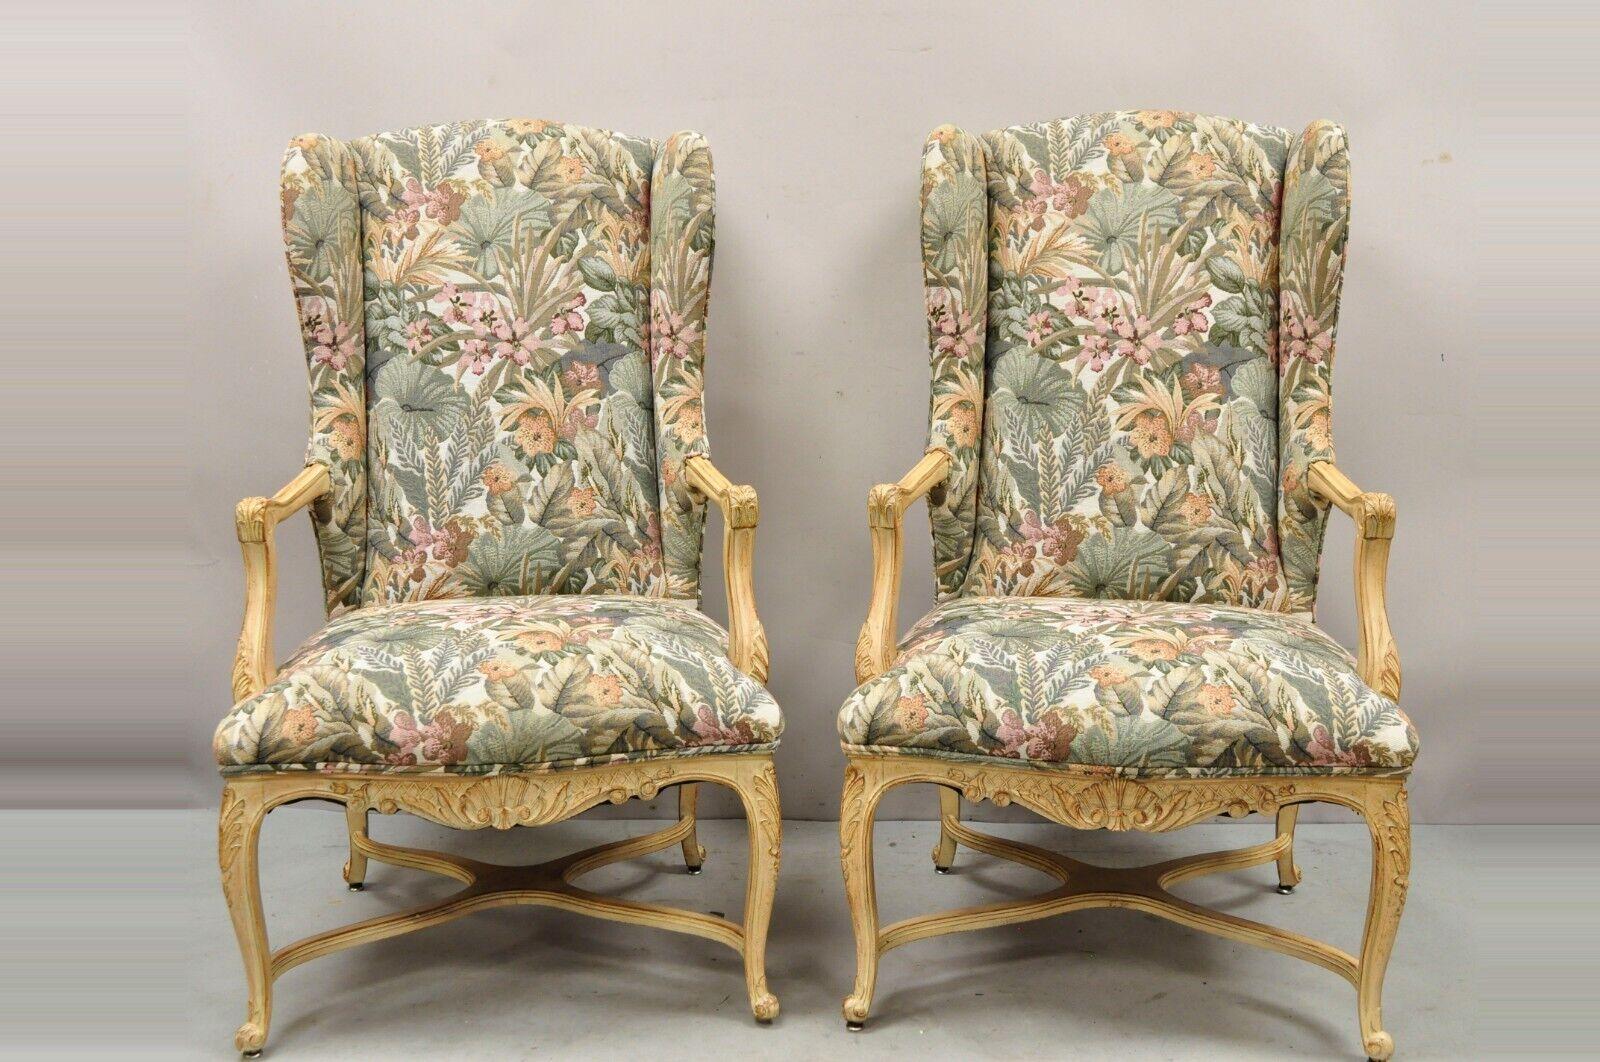 Pair of French Provincial Country Louis XV Style Upholstered Wingback Lounge Chairs Item features a white washed distressed finish, shapely winged backs, cross stretcher base, floral print upholstery, nicely carved details, cabriole legs, quality